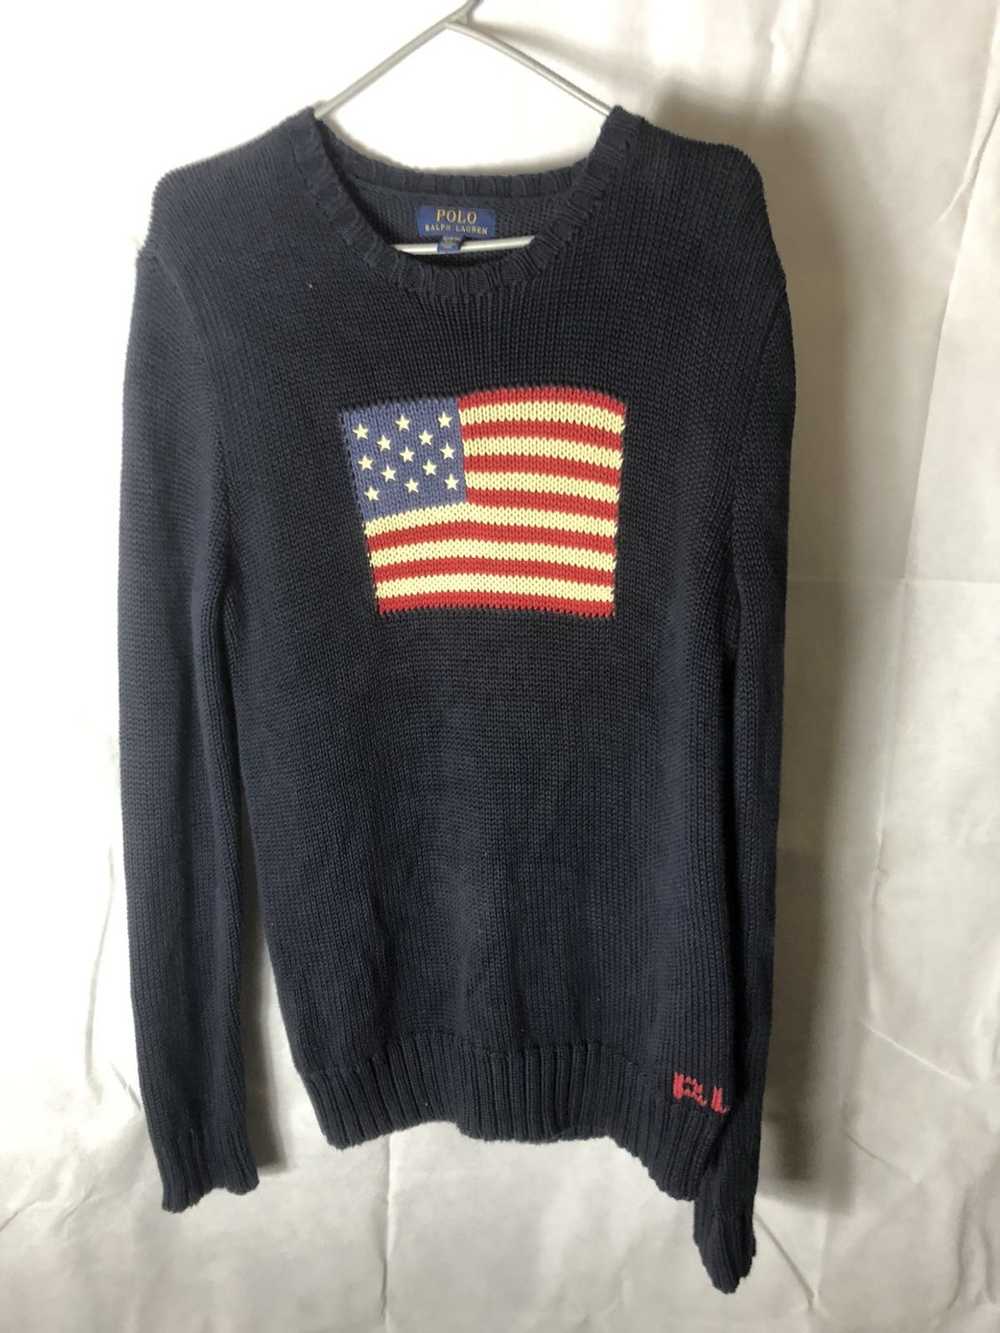 Polo Ralph Lauren American Flag Knit Sweater - image 1